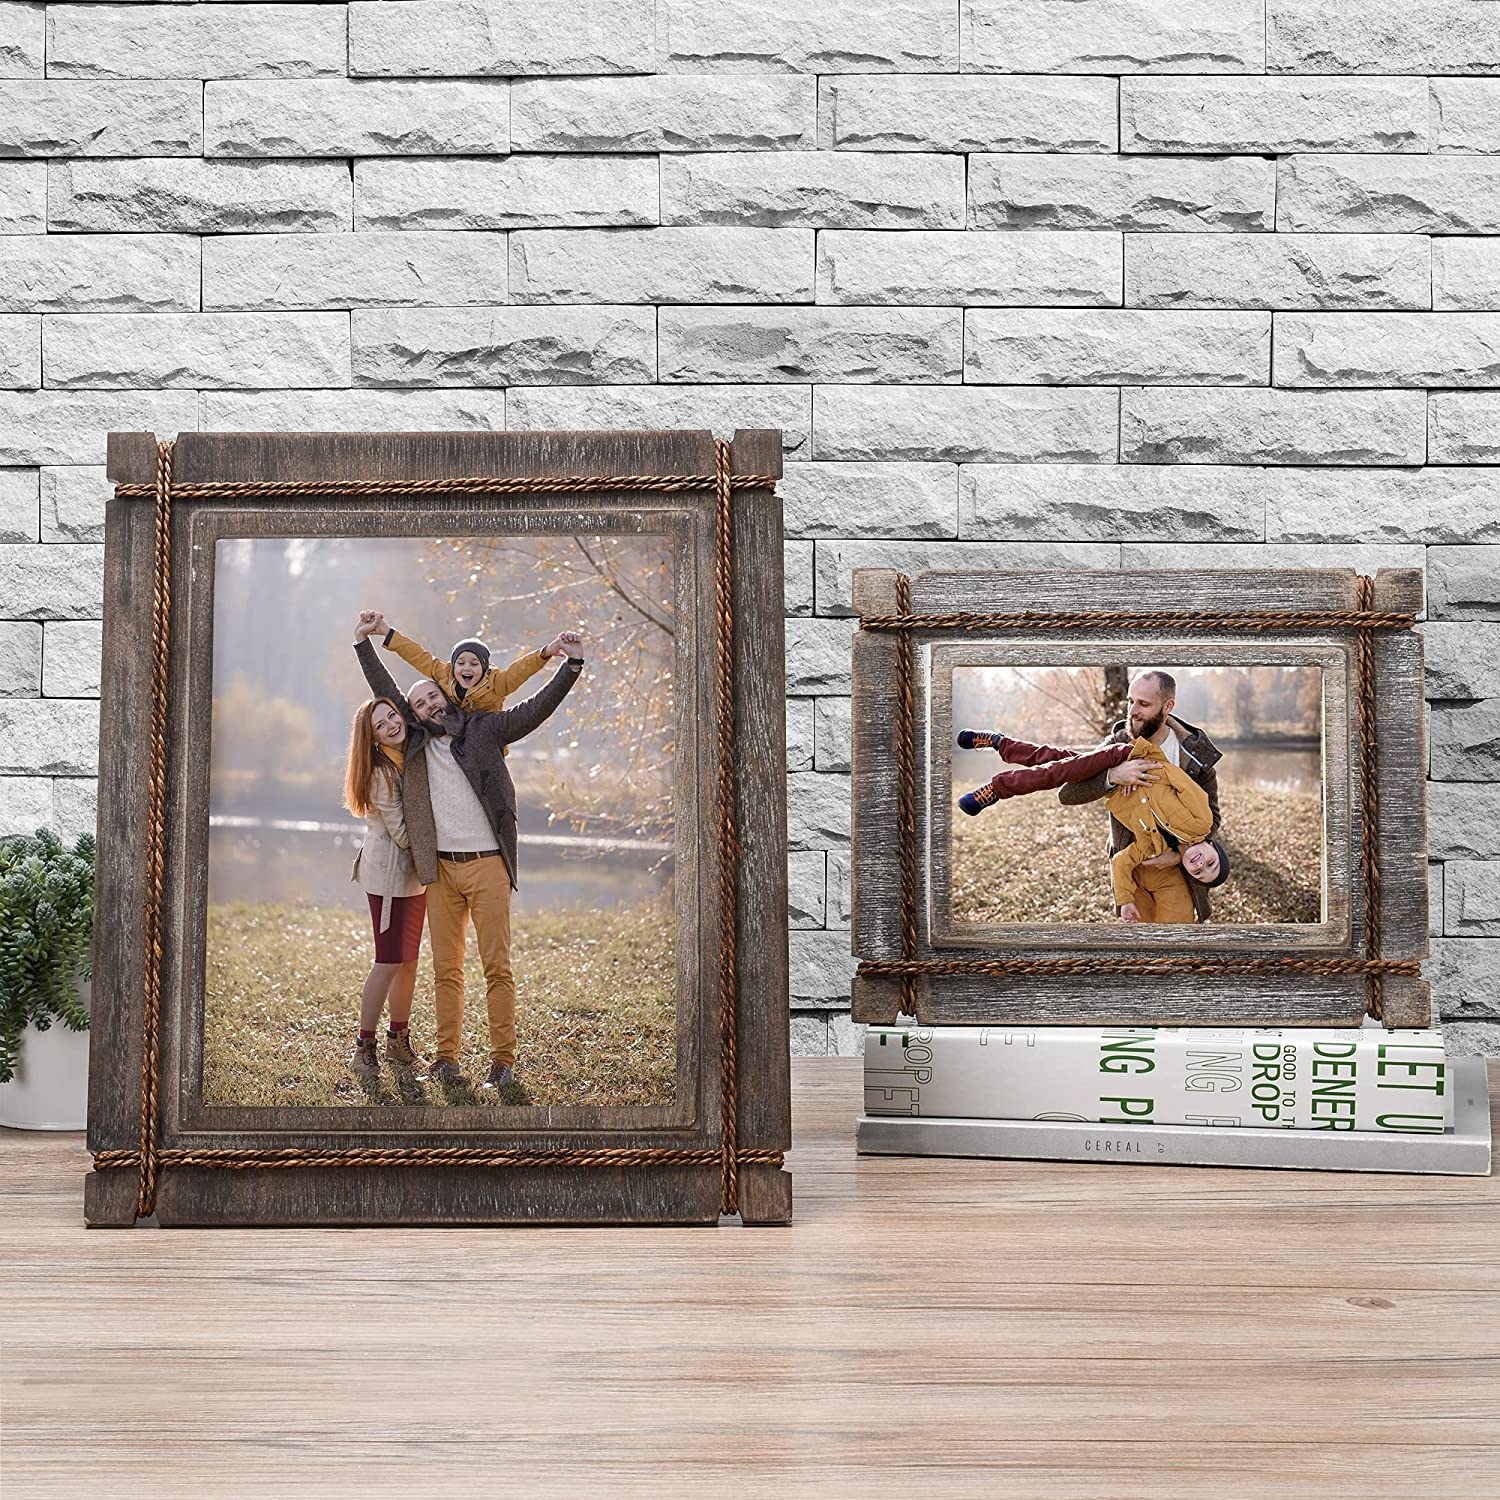 AKRILANE Wooden Picture Stylish Frame - Vintage and Rusty Look Style Photo Frame for Wall Mount & Wall Handing - Table Top Stand Display for Home Décor Wall Display - Style A - Akrilane